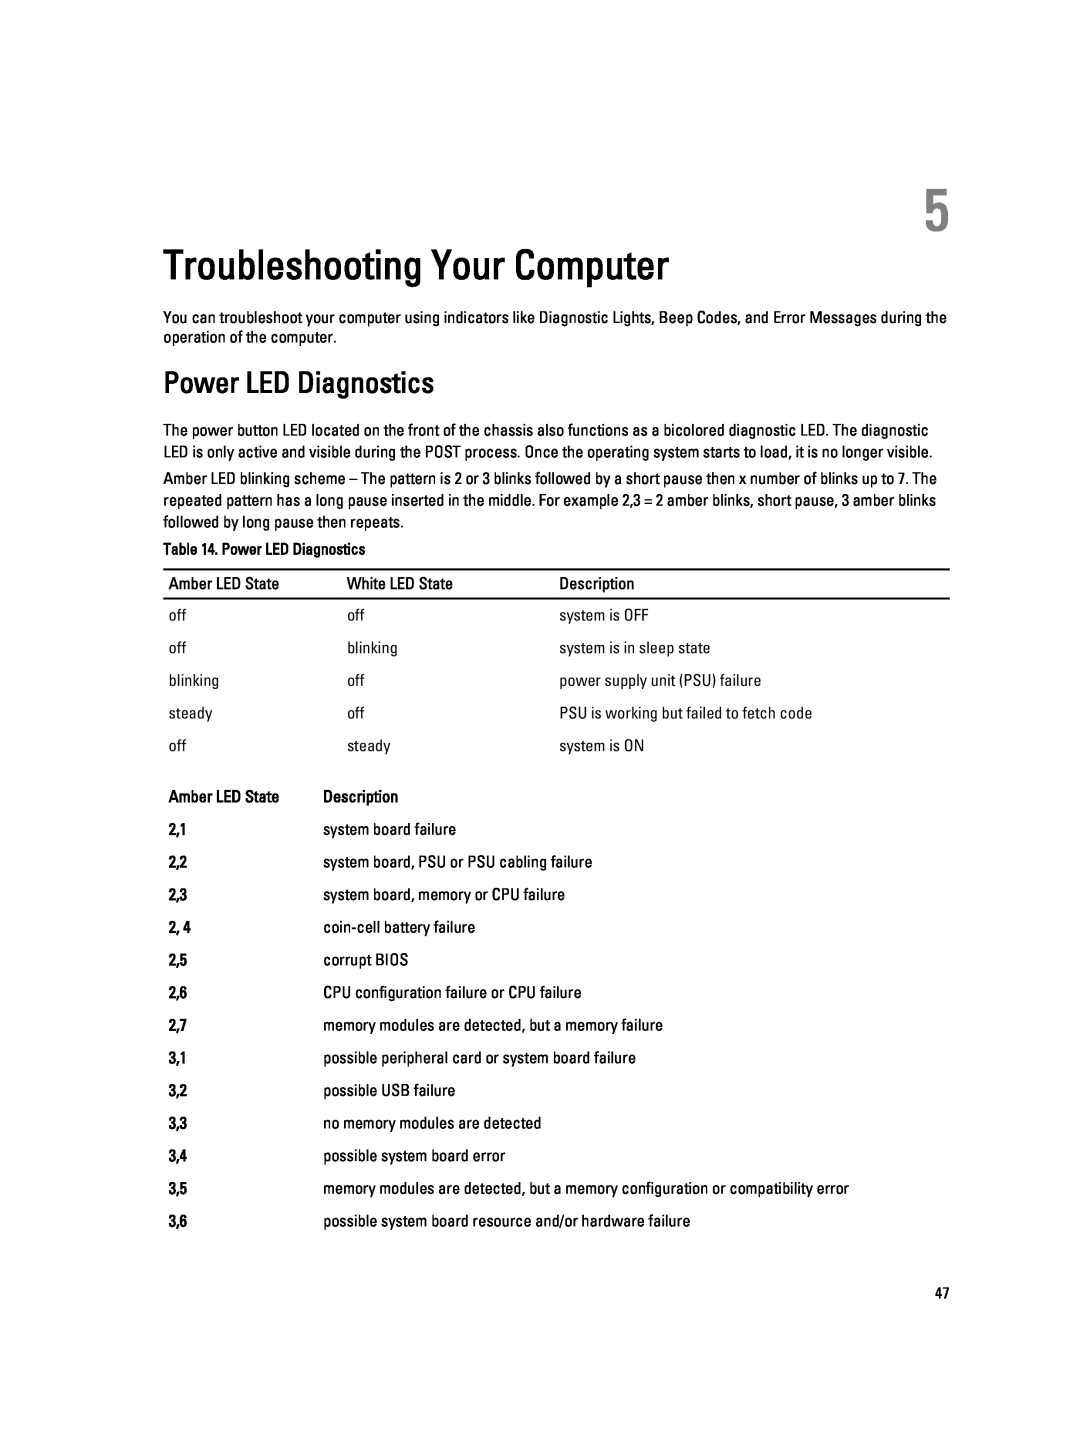 Dell T1700 owner manual Troubleshooting Your Computer, Power LED Diagnostics 